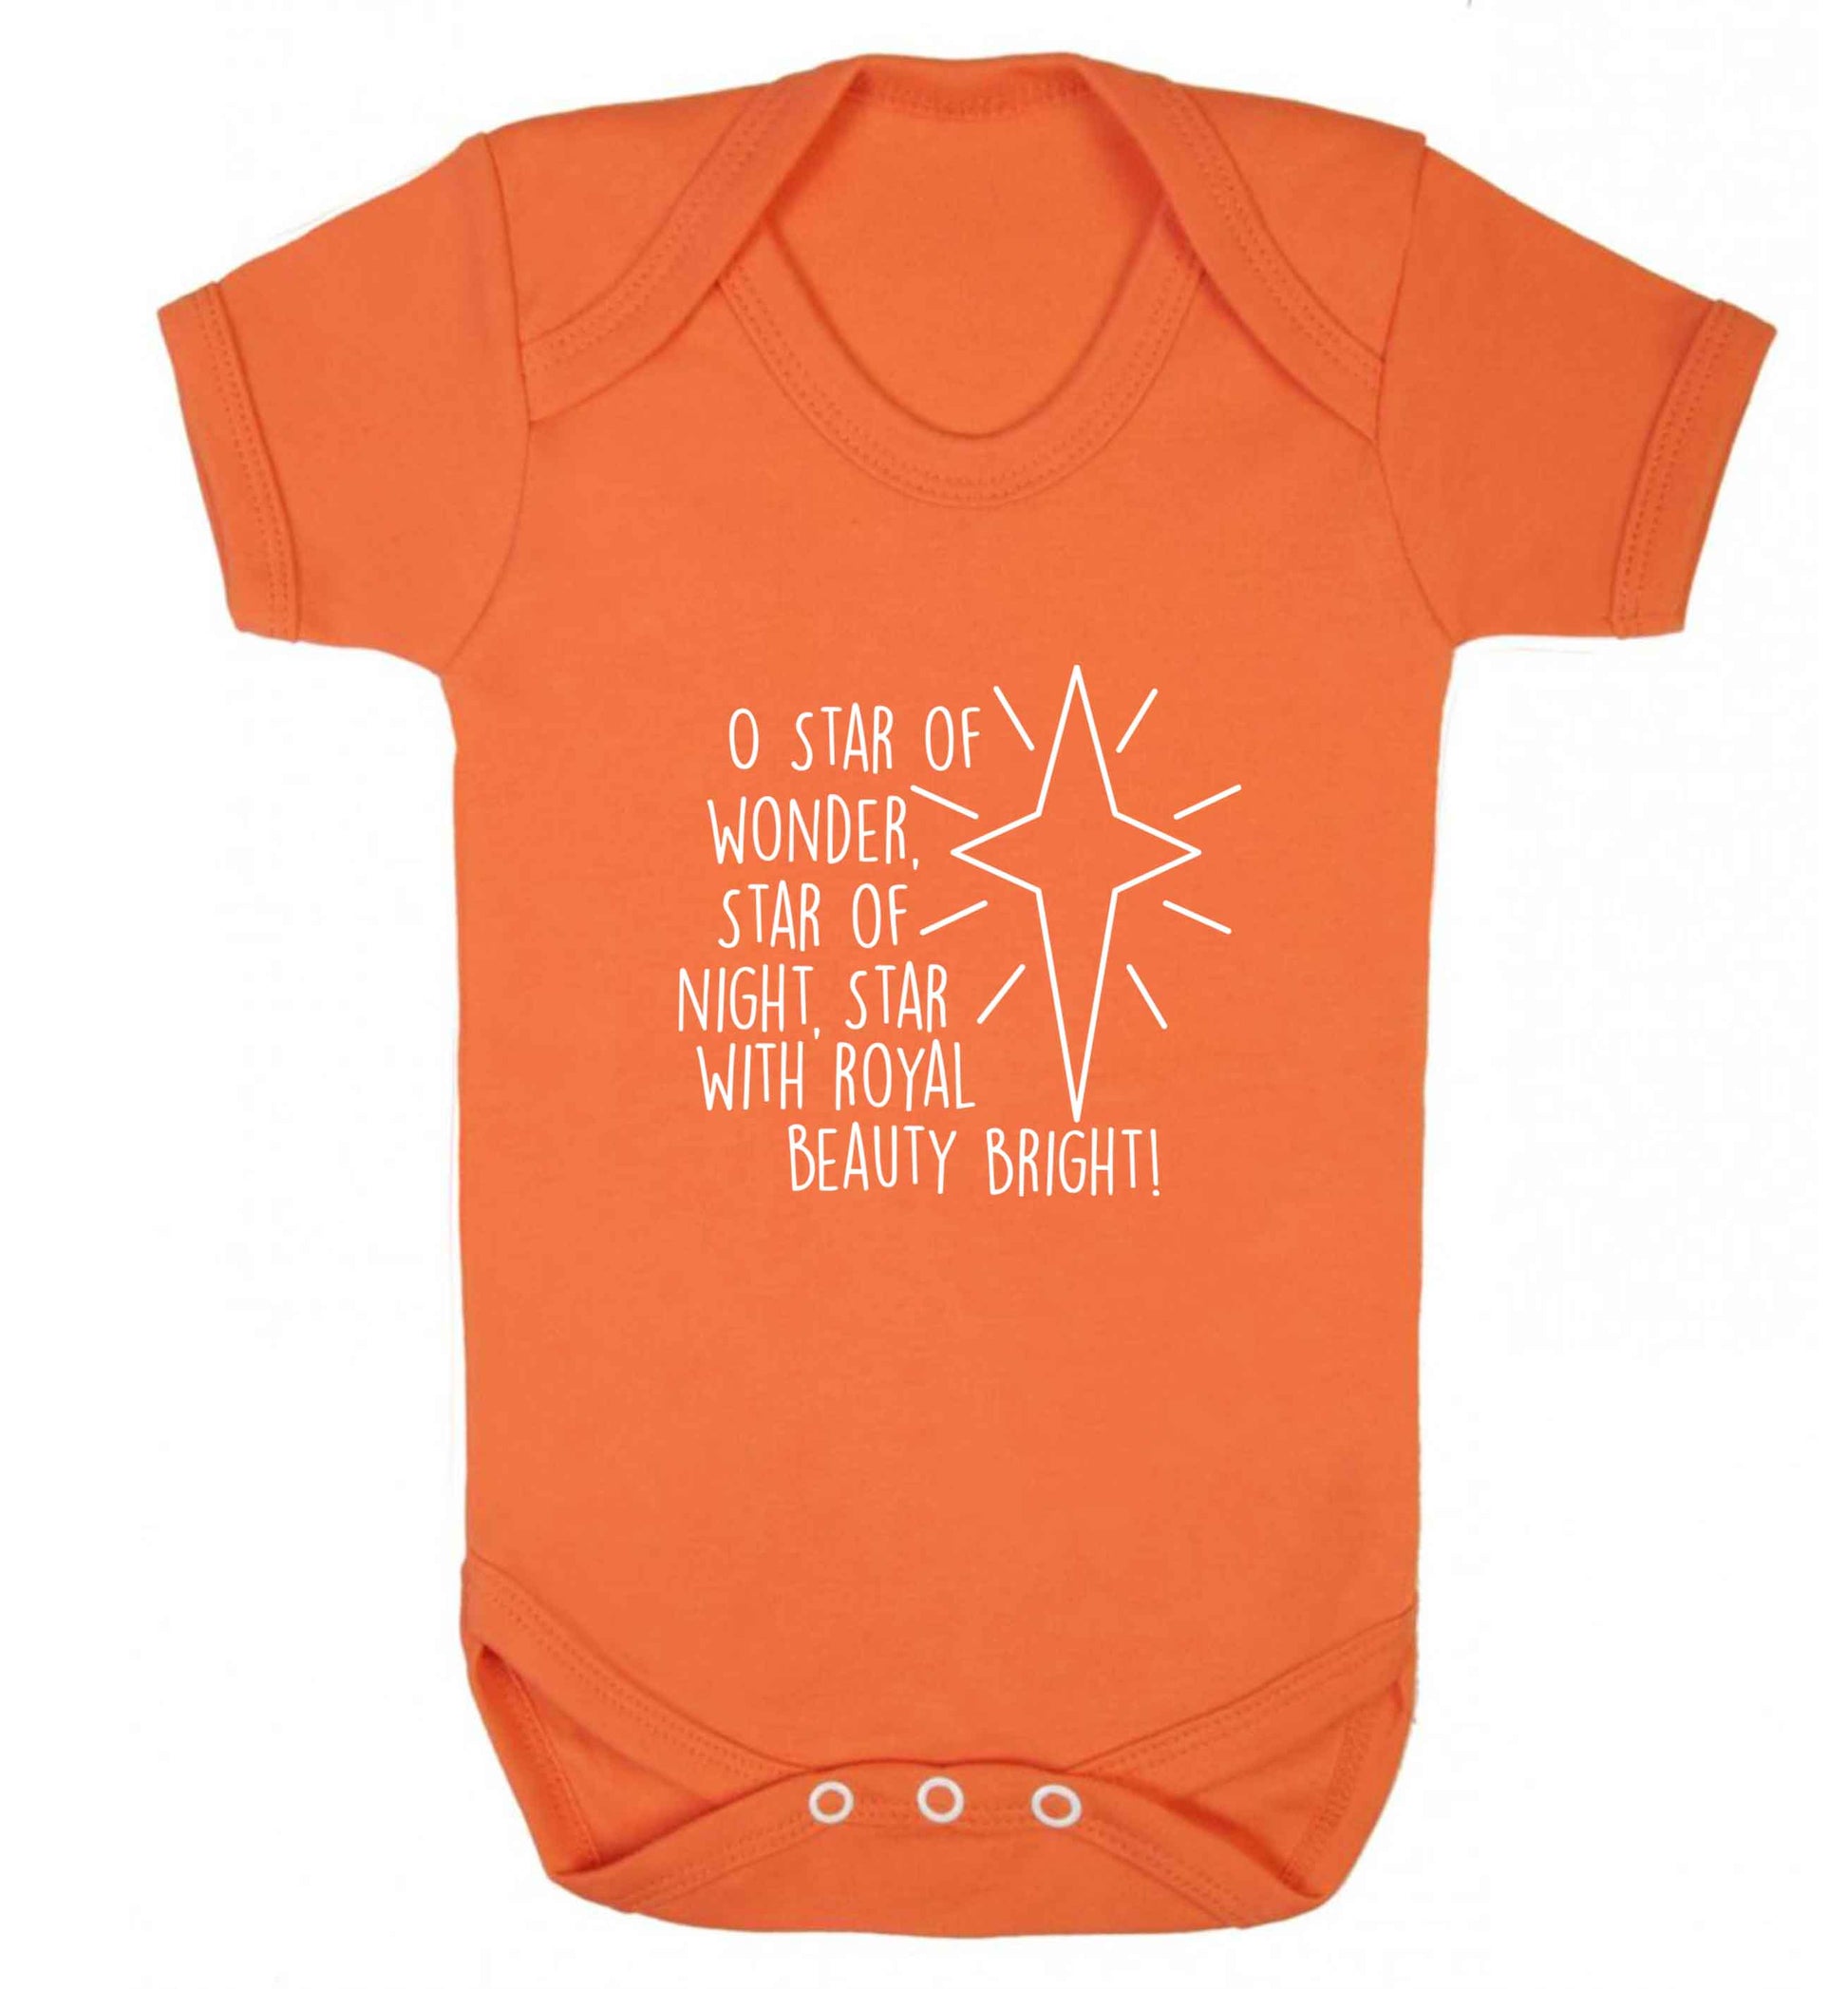 Oh star of wonder star of night, star with royal beauty bright baby vest orange 18-24 months